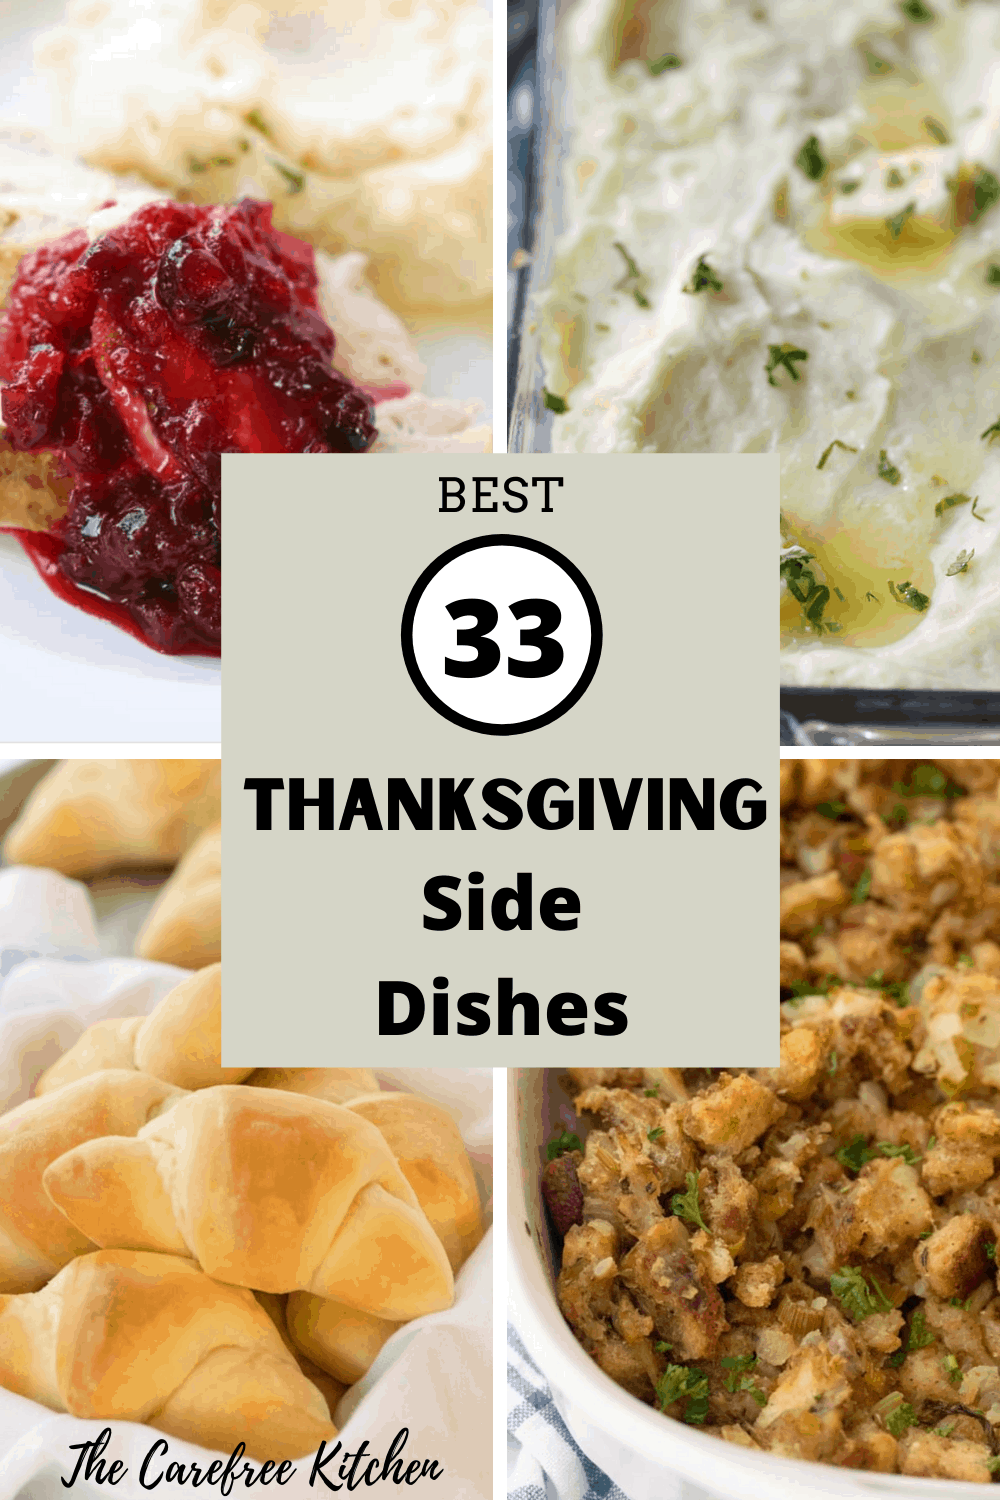 Pinterest pin for Best Thanksgiving Side Dishes.